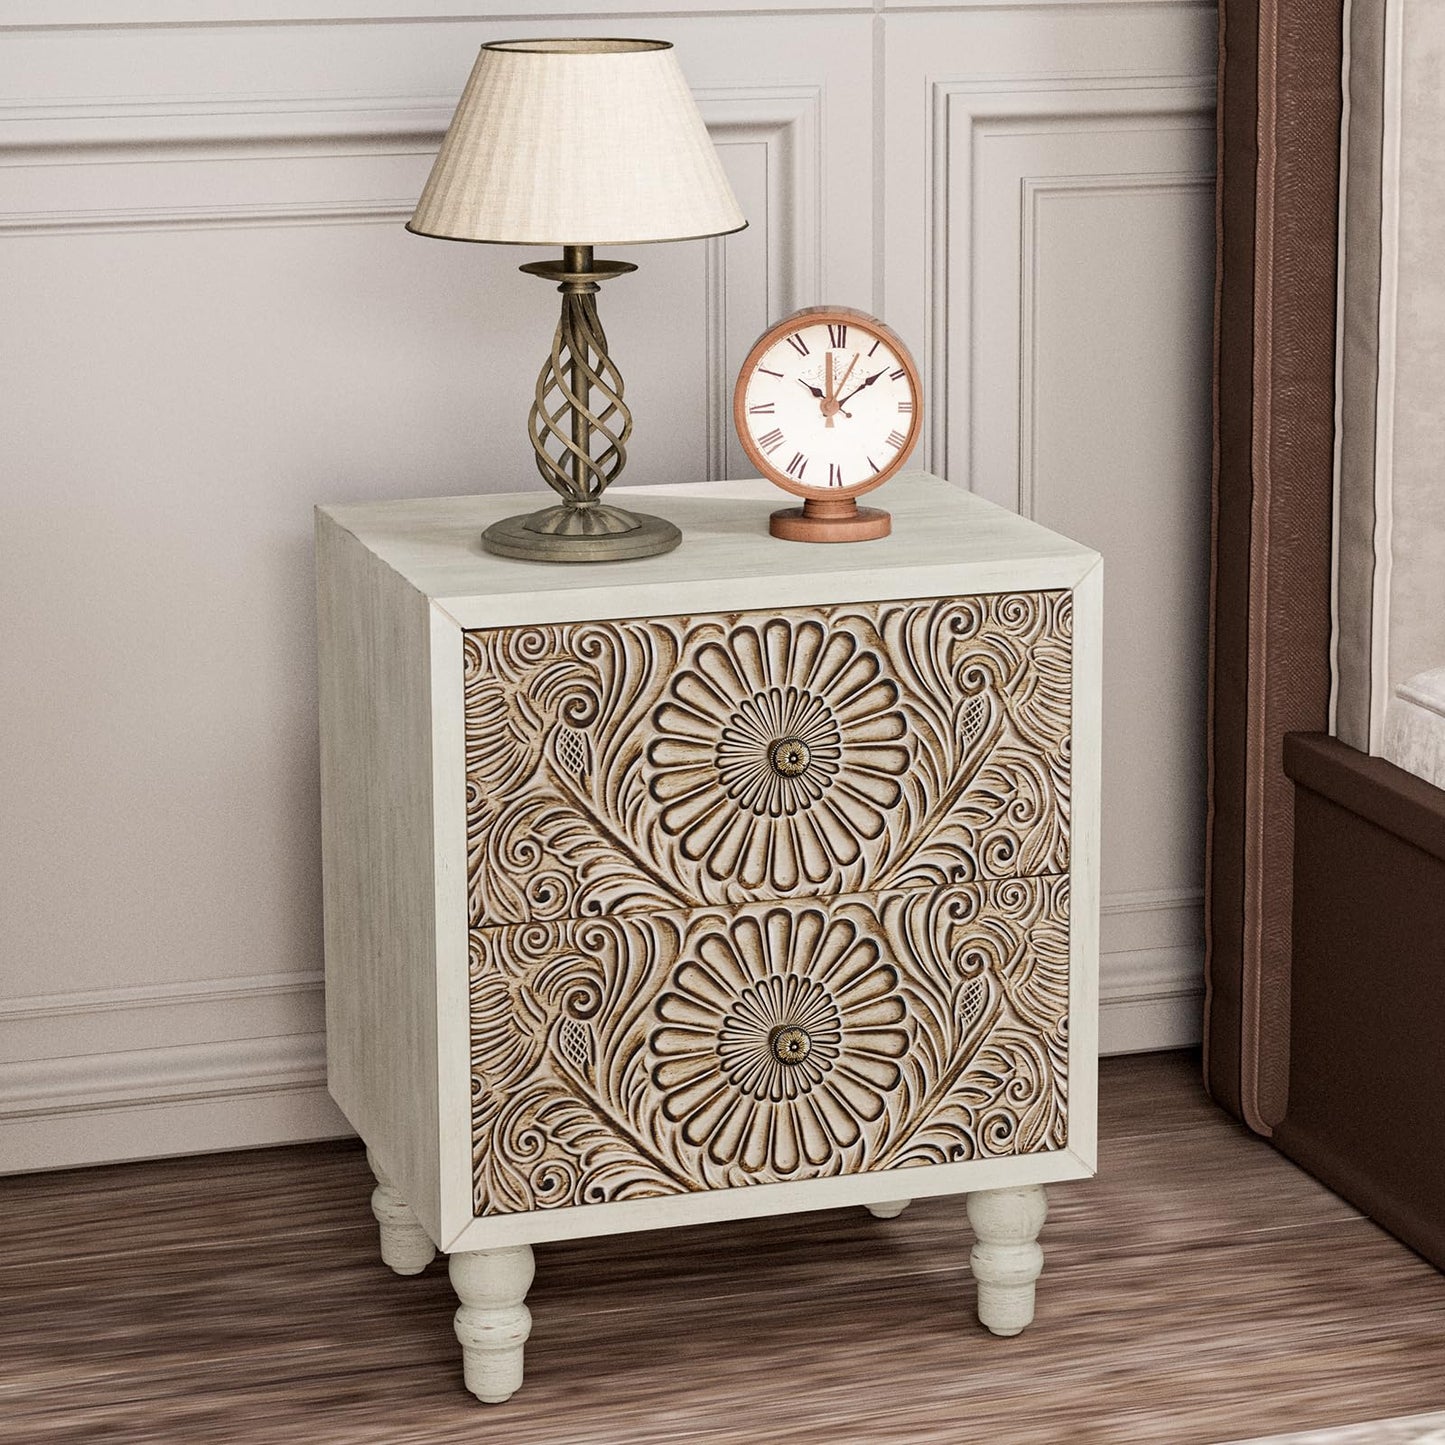 HOMPUS End Table with 2 Drawers Sets of 2, 2 Tier Bedside Table Sets, Wood Grain Nightstand, Small Accent Table with Pattern Drawer, Side Table for